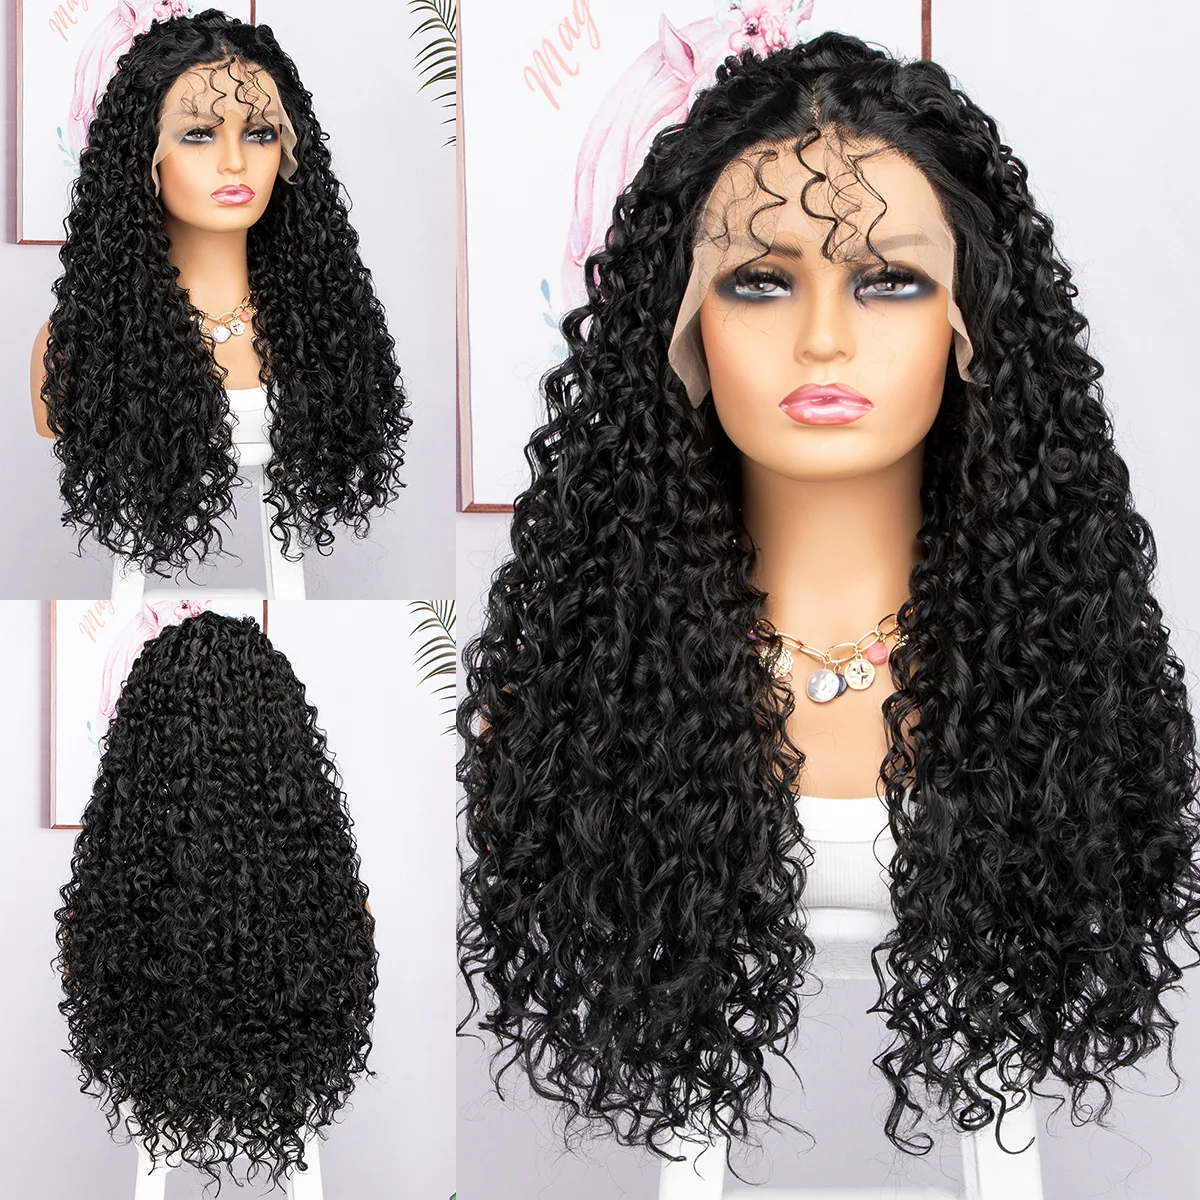 

2022Hand-woven front lace wig headgear black long curly hair chemical fiber headgear T-shaped lace wig hairdressing accessories